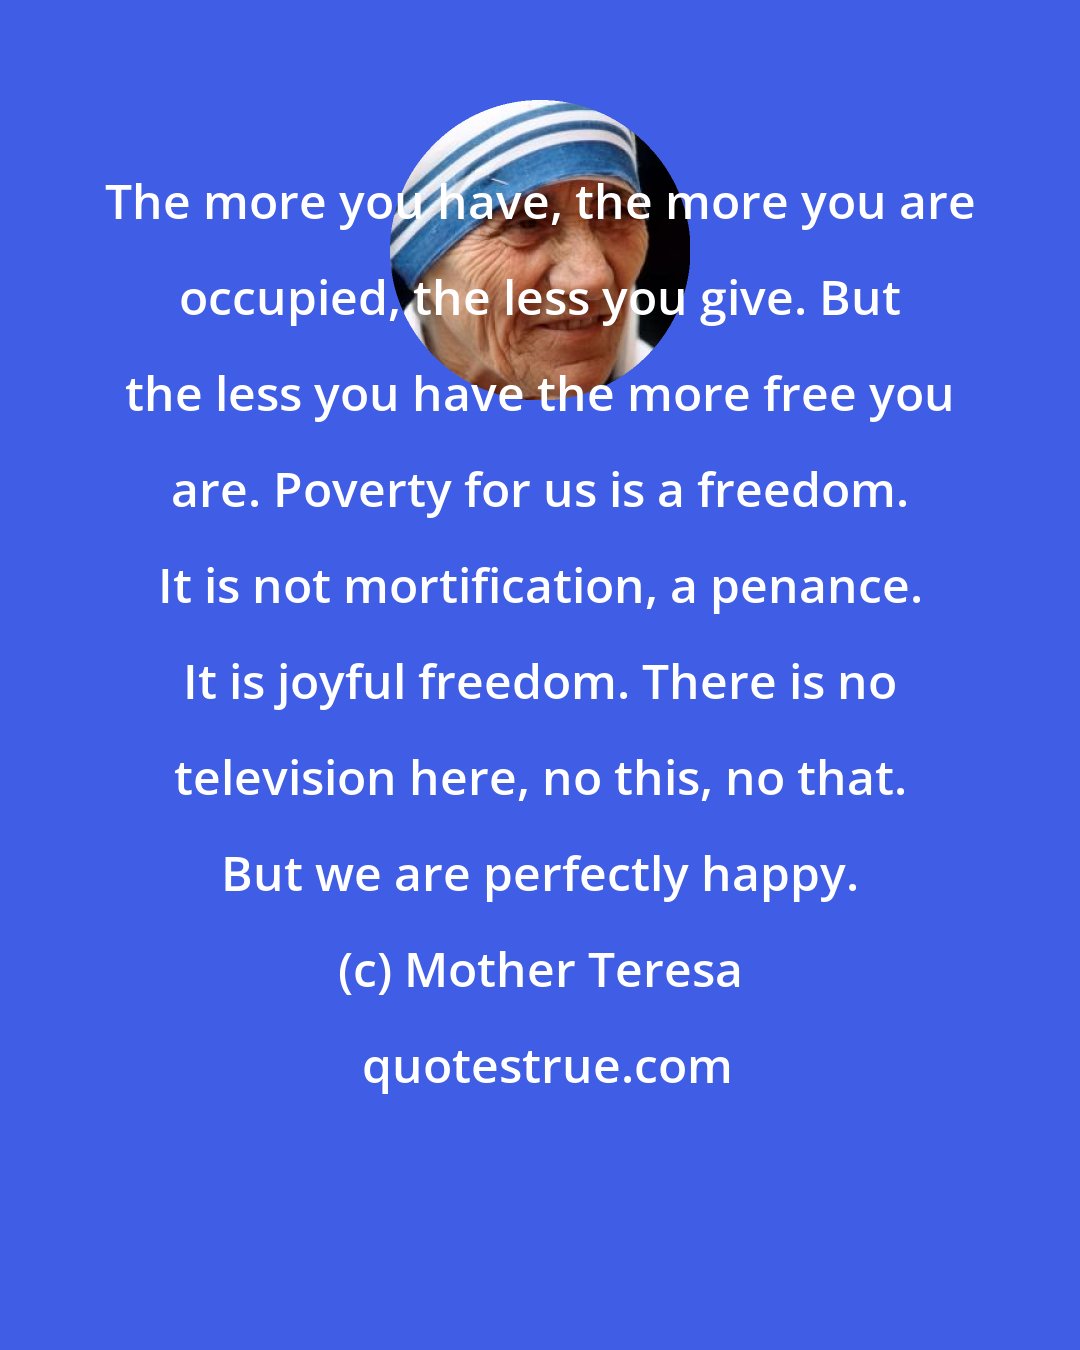 Mother Teresa: The more you have, the more you are occupied, the less you give. But the less you have the more free you are. Poverty for us is a freedom. It is not mortification, a penance. It is joyful freedom. There is no television here, no this, no that. But we are perfectly happy.